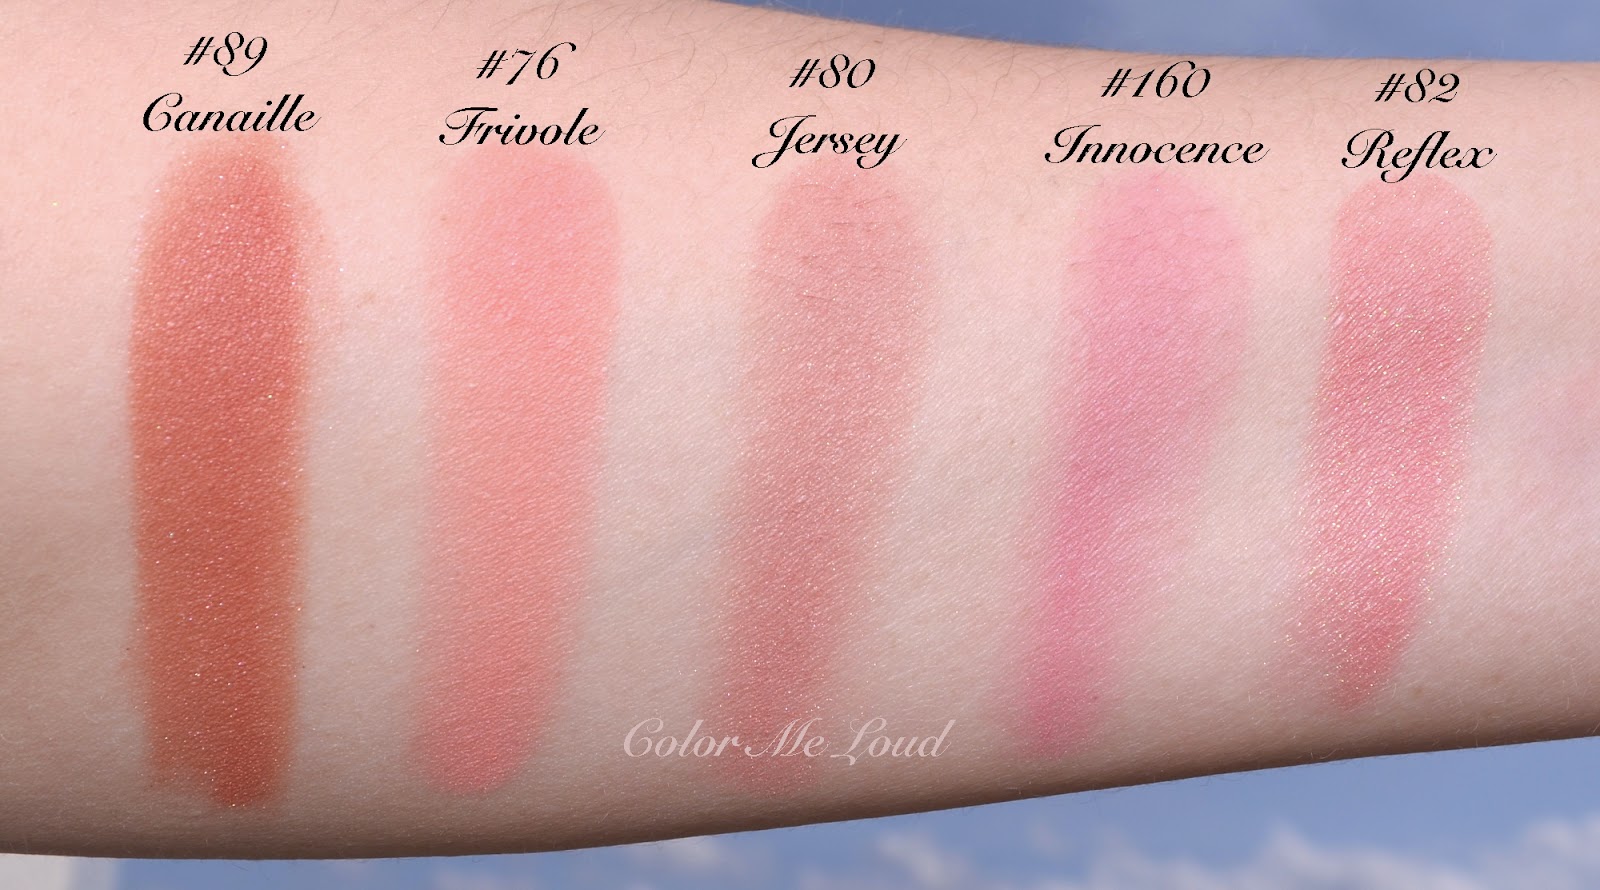 Chanel Malice (71) Joues Contraste Blush Review & Swatches